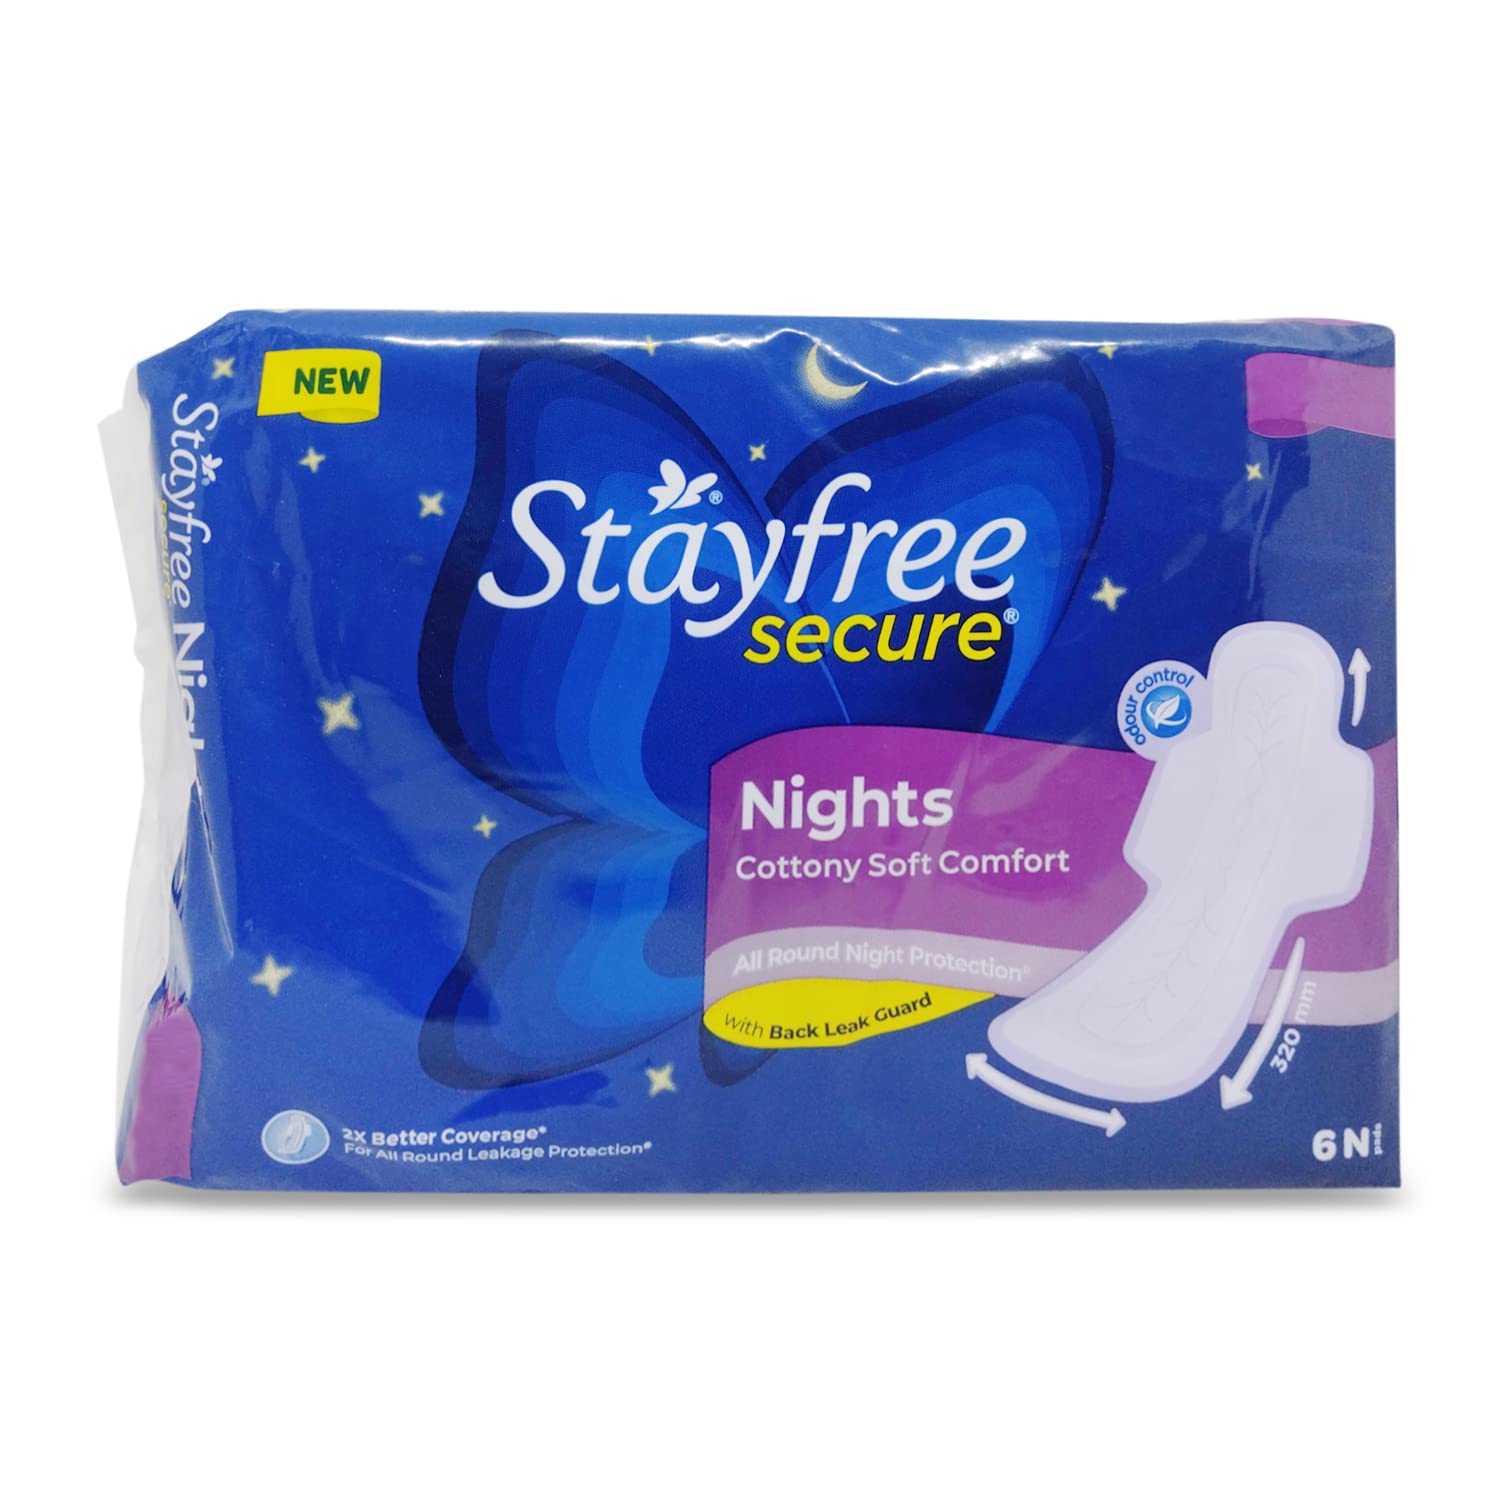 Stayfree Secure Nights Cottony Soft Comforts Sanitary Napkins - Pack of 6